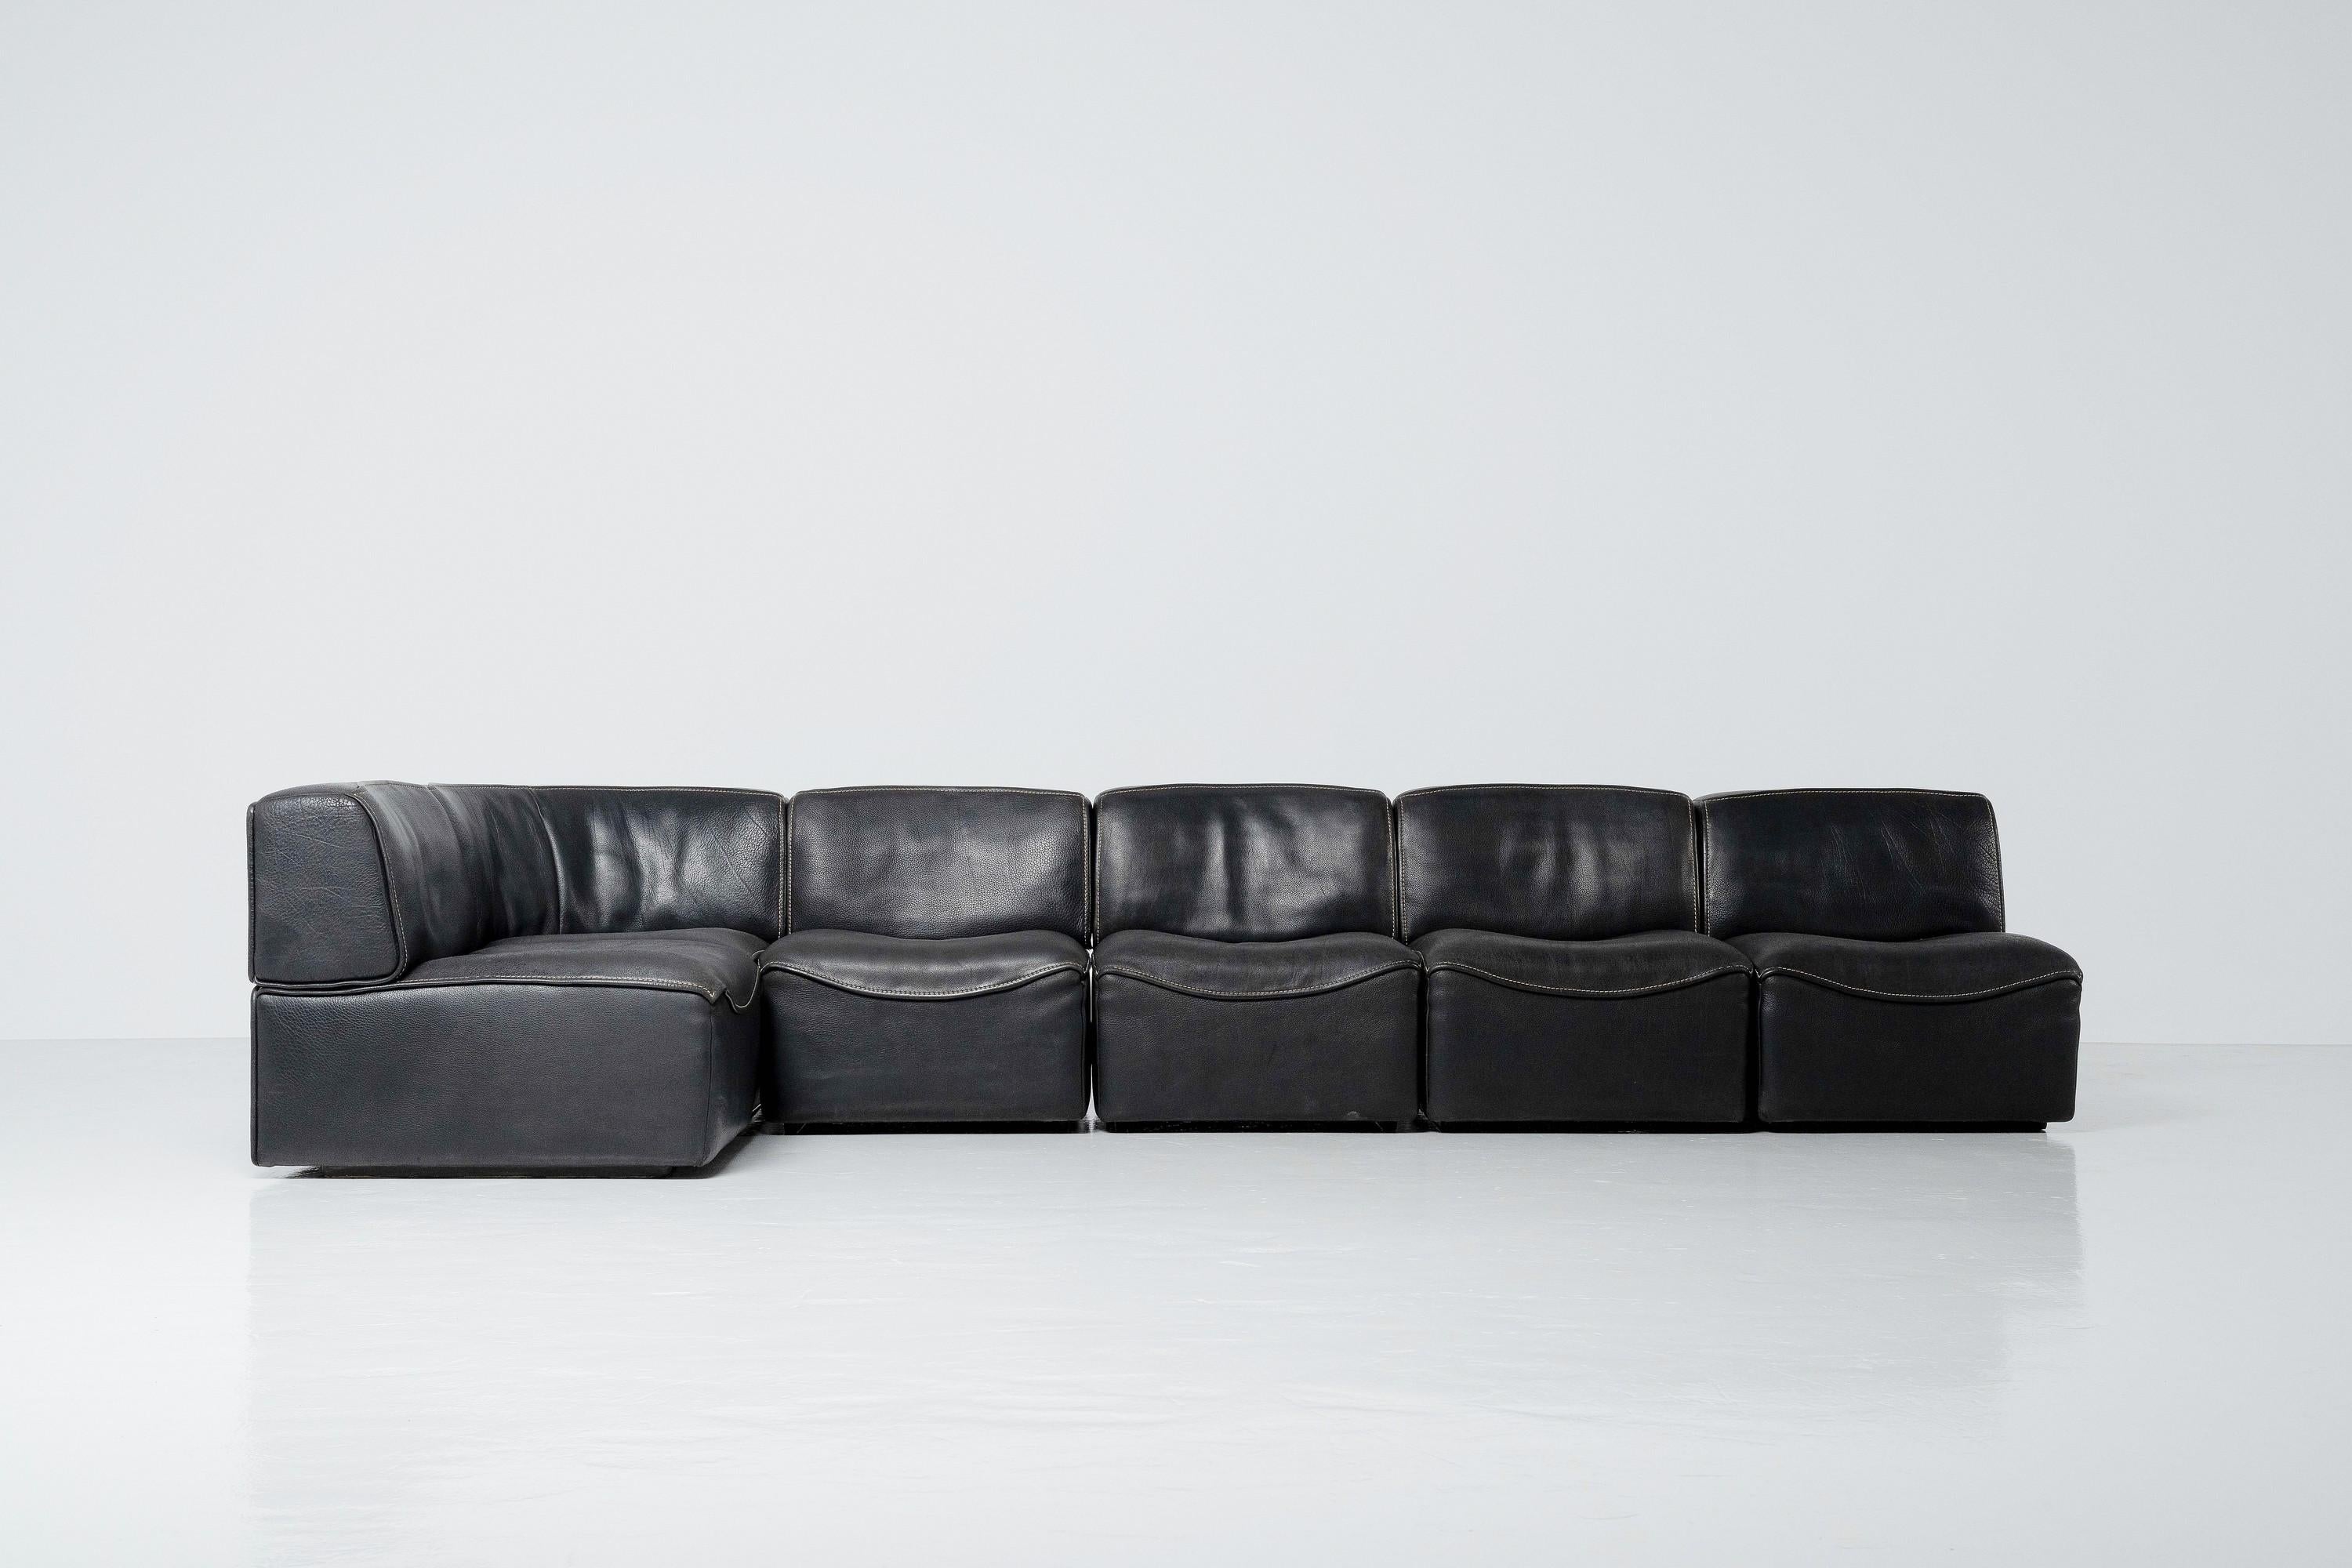 Very nice black model 'DS15' modular sofa designed and manufactured in Switserland by De Sede in 1970. This modular sofa is in original condition and was made of very thick black buffalo leather which is very sturdy, and ages beautifully over time.